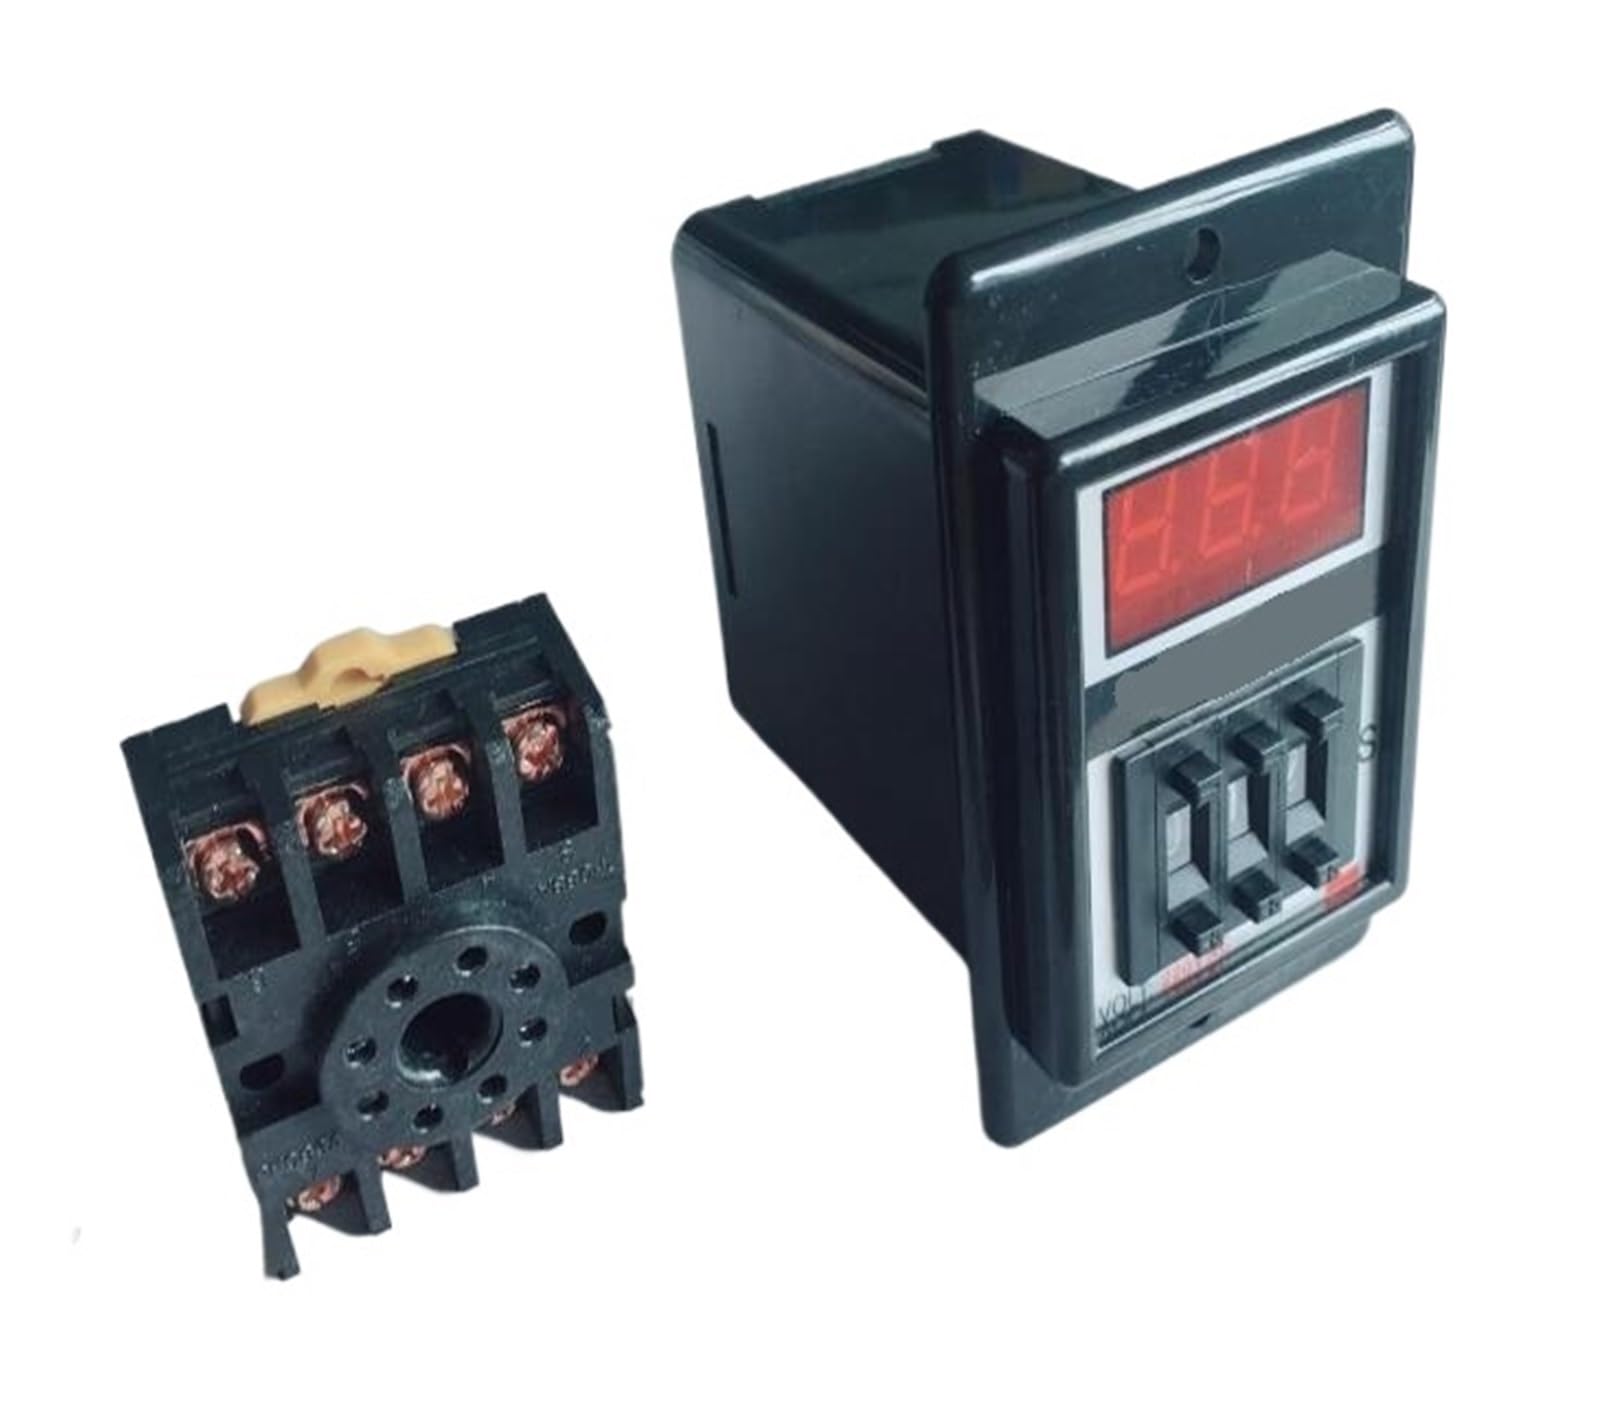 1-99S 1-9.9S 1-99M digits programmable timer delay relay ASY-2D Delay Timer Time Relay 8PIN with base AUOQKQUT(ASY-2D 99M,AC110V) von AUOQKQUT